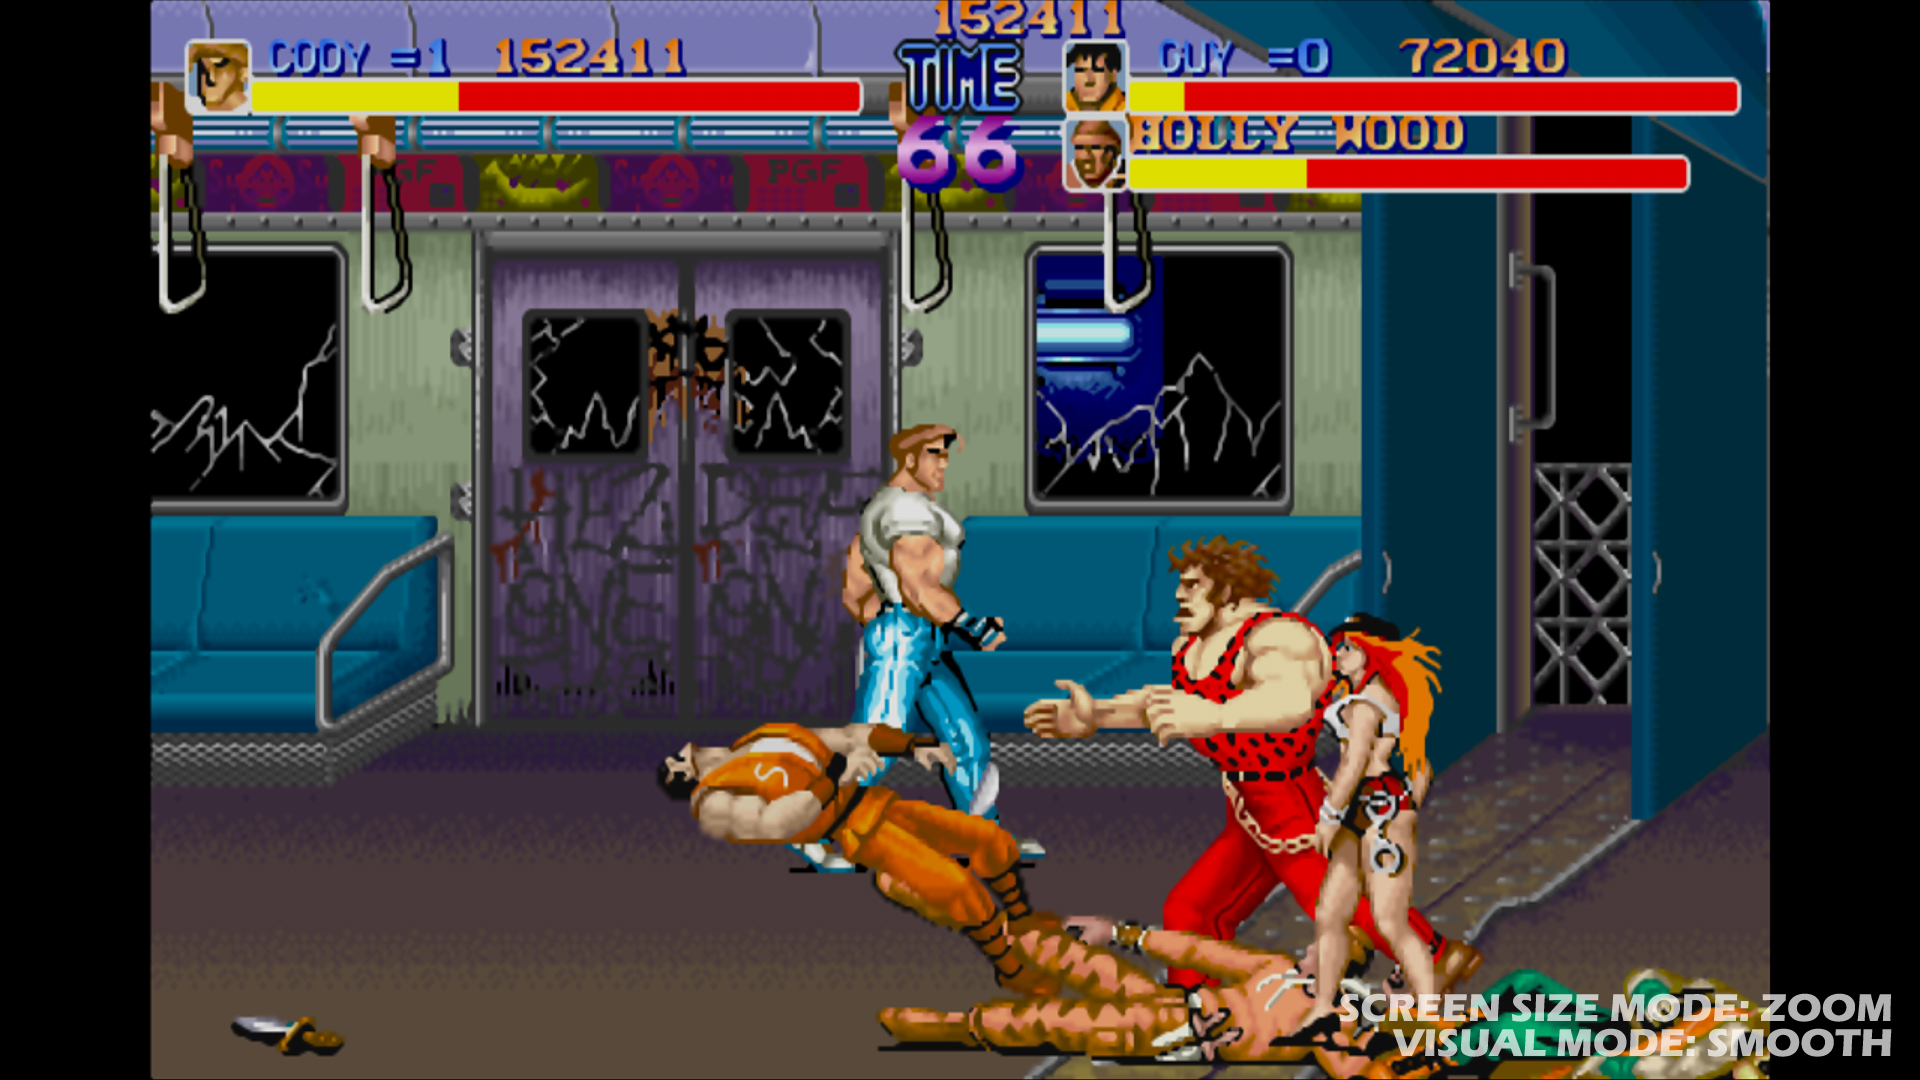 This week's free game: 'Final Fight